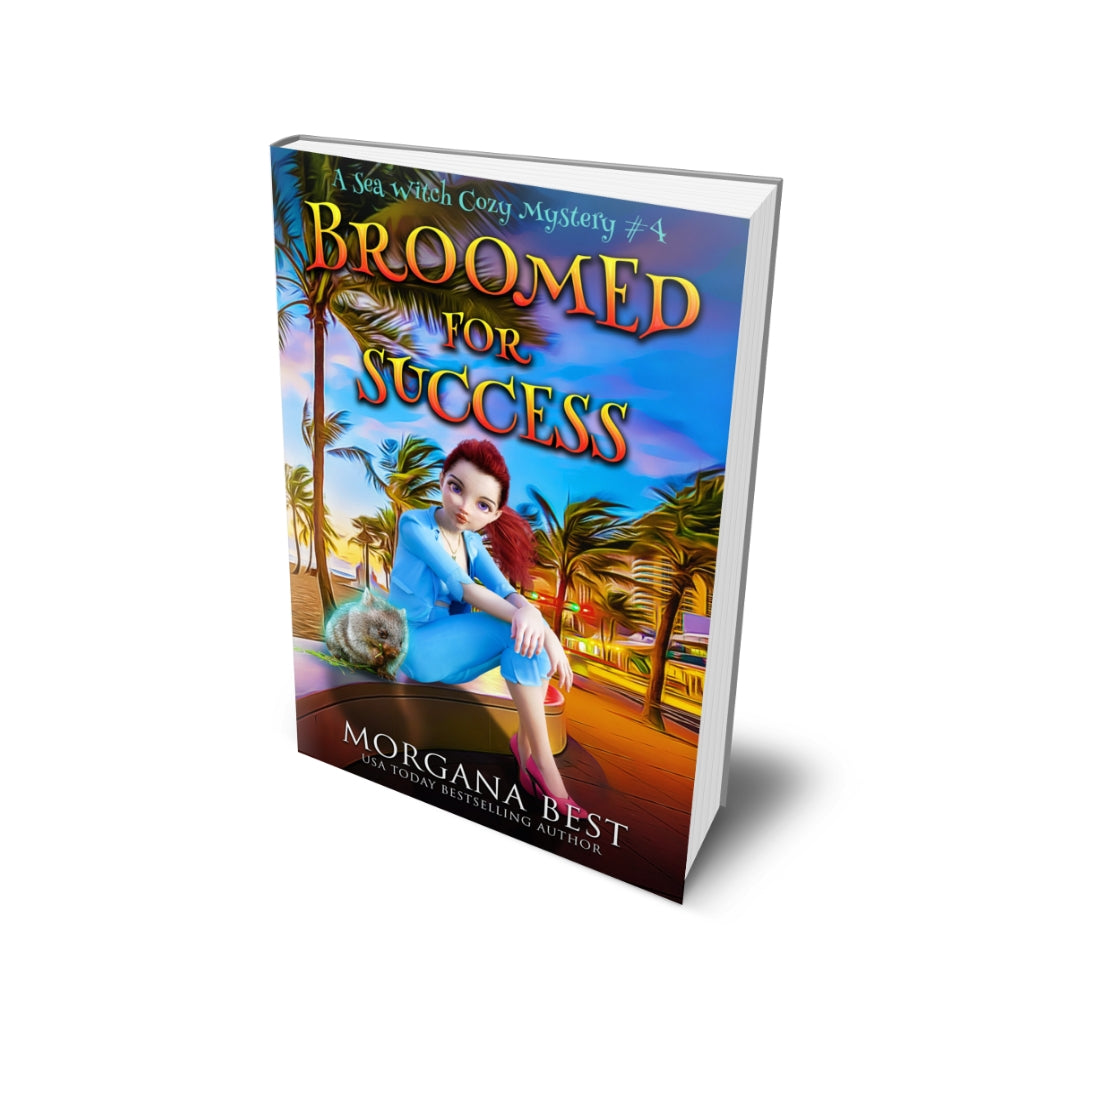 Broomed For Success PAPERBACK cozy mystery by morgana best